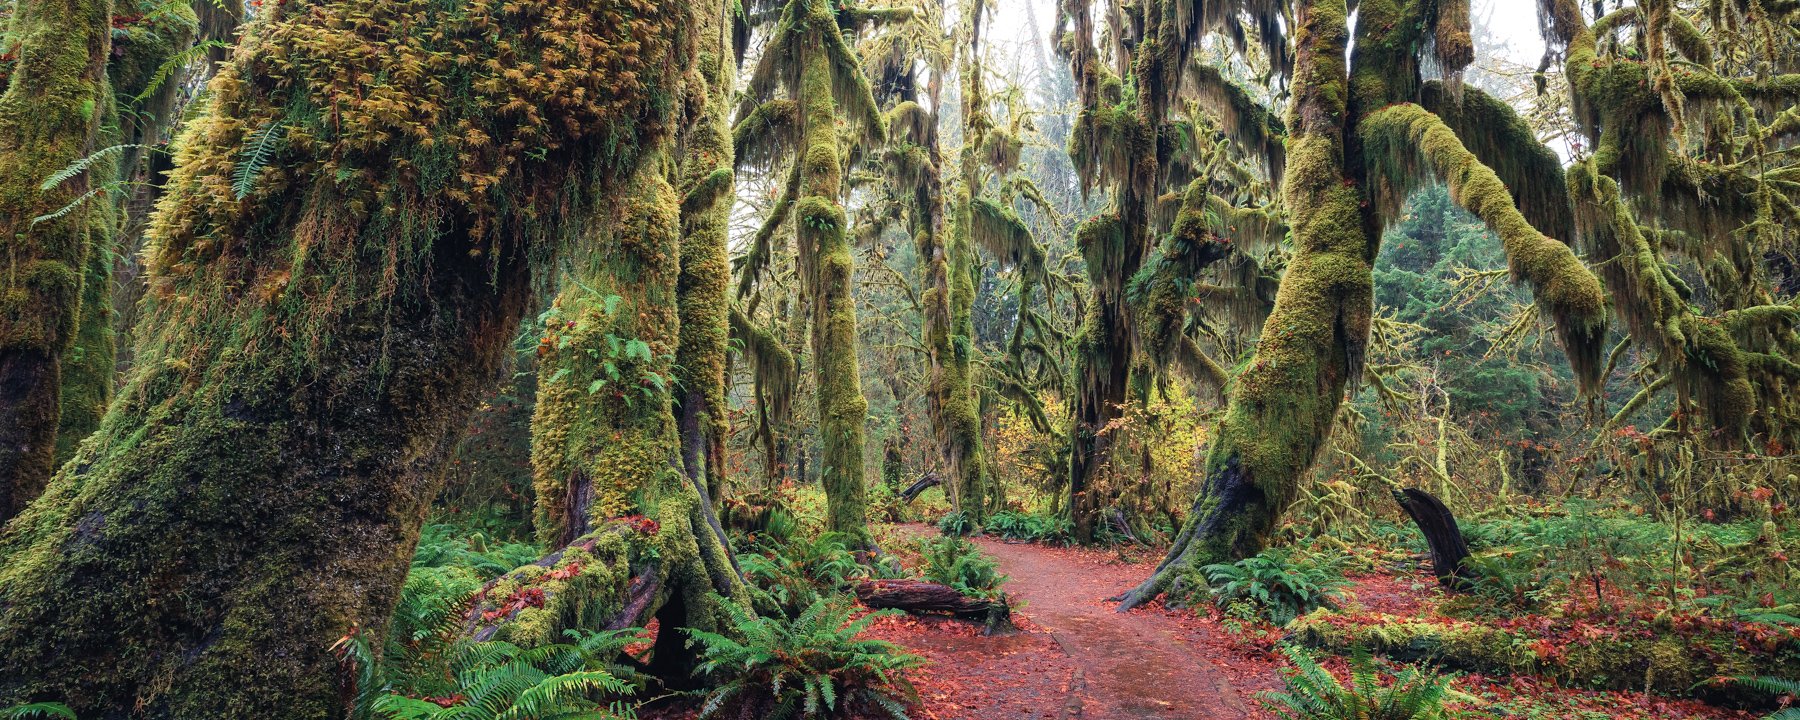 Fall Colors at the Hoh Rainforest on the Olympic Peninsula by Michael Matti.jpg